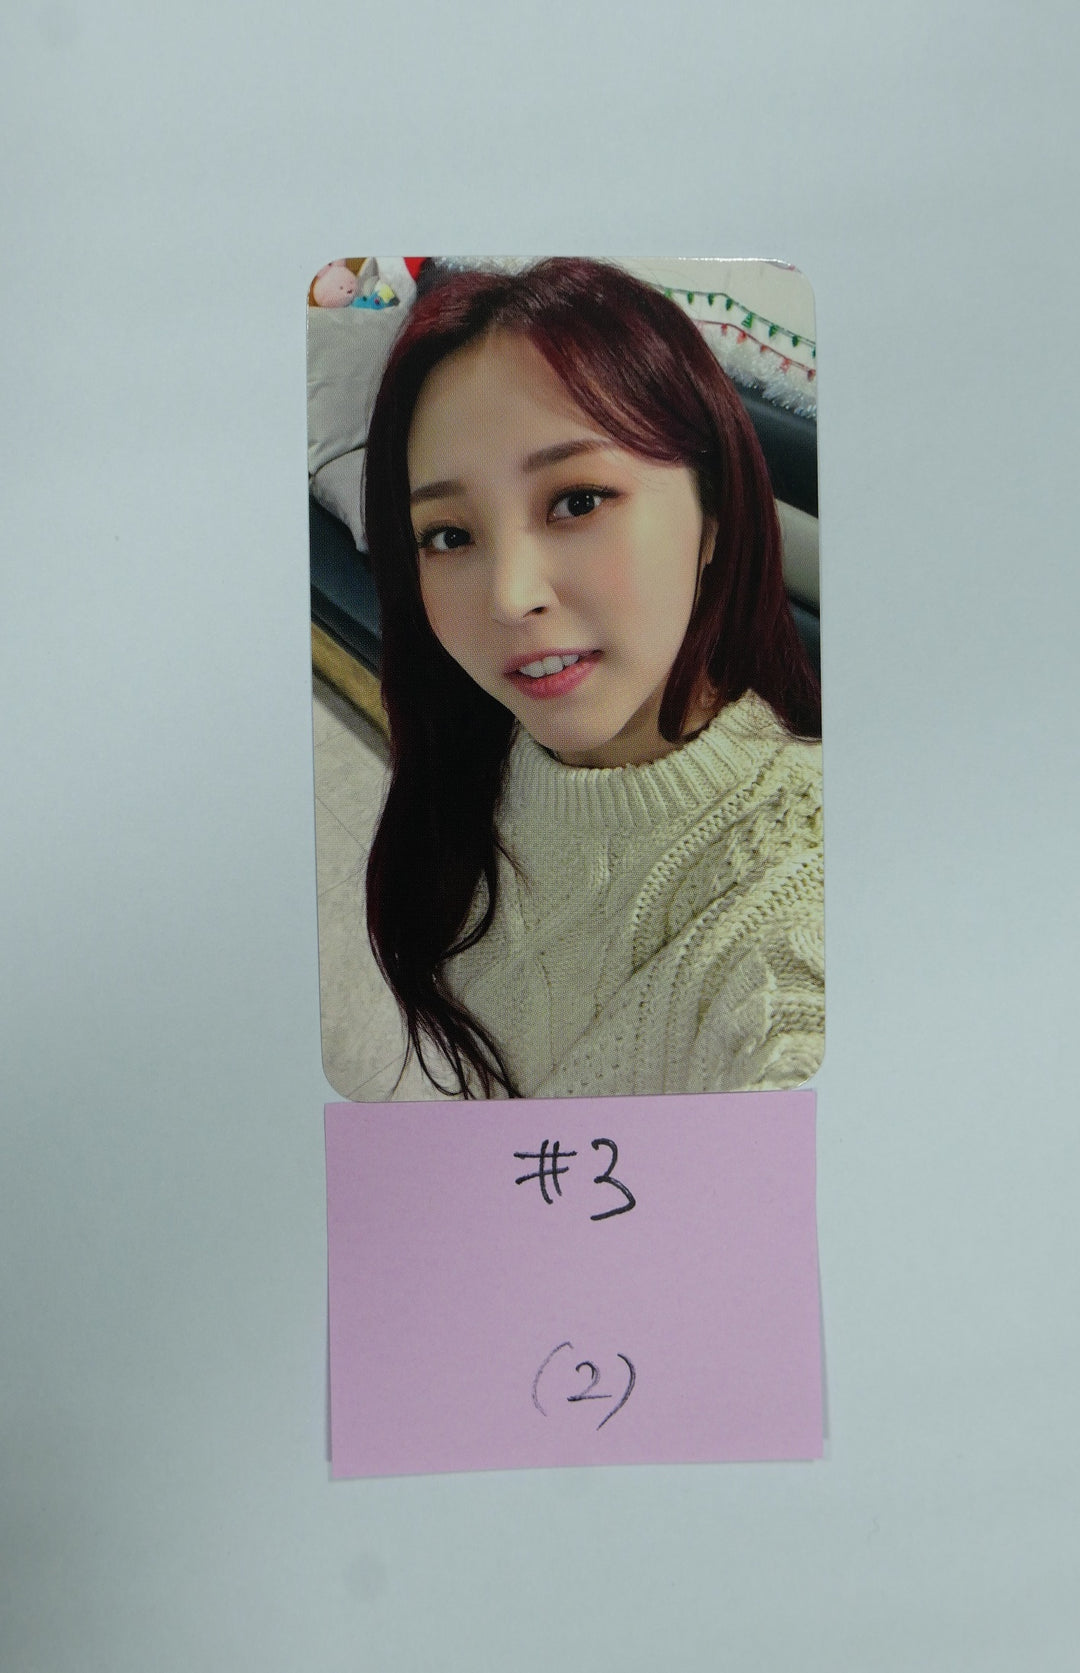 Moon Byul (Of Mamamoo) "6equence" - Applemusic Luckydraw Event Photocard